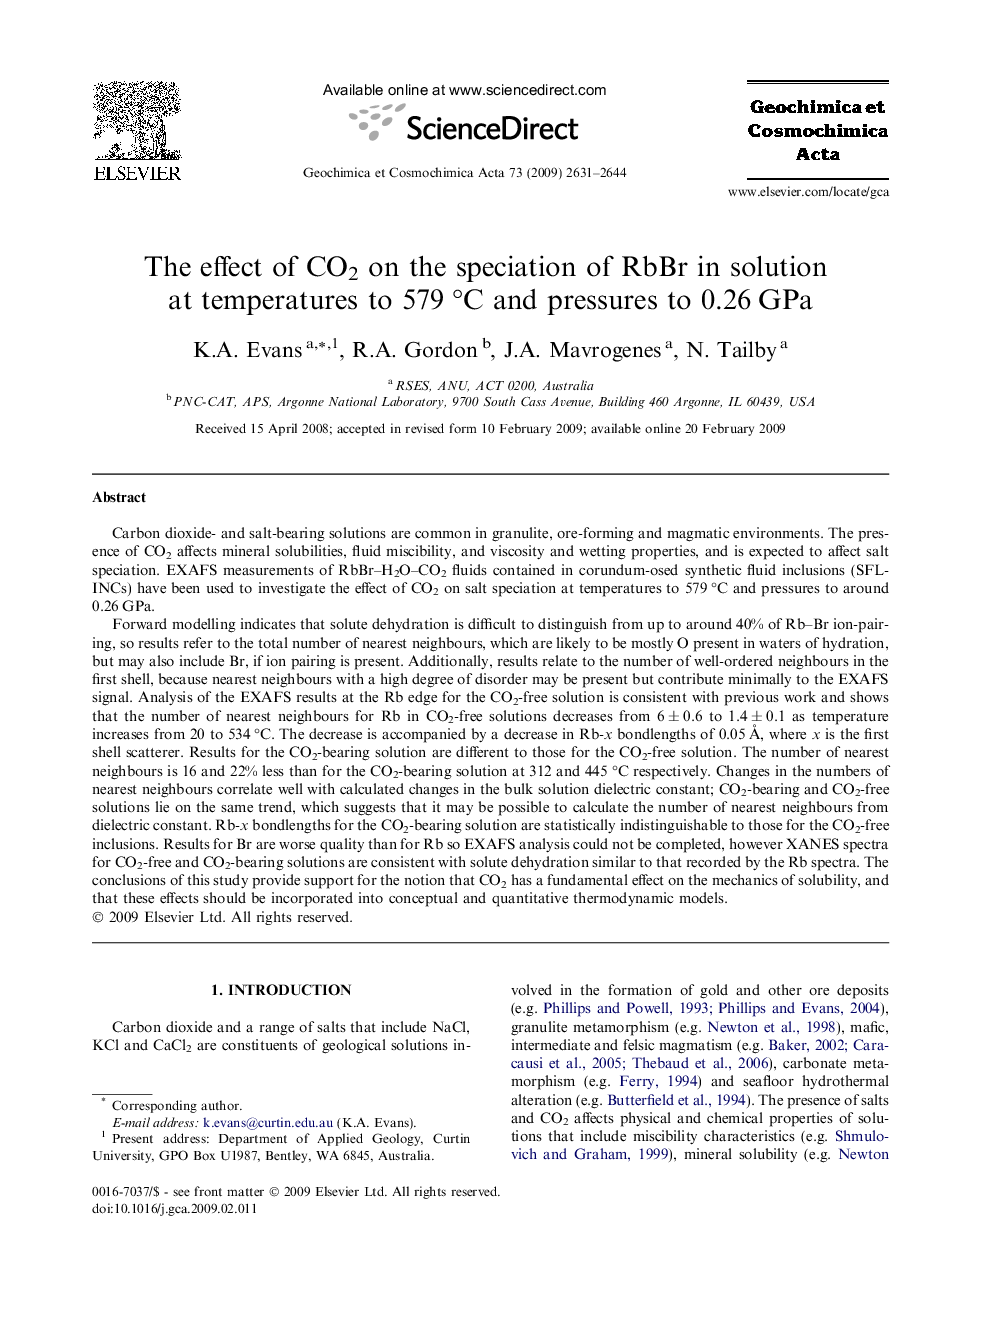 The effect of CO2 on the speciation of RbBr in solution at temperatures to 579 °C and pressures to 0.26 GPa